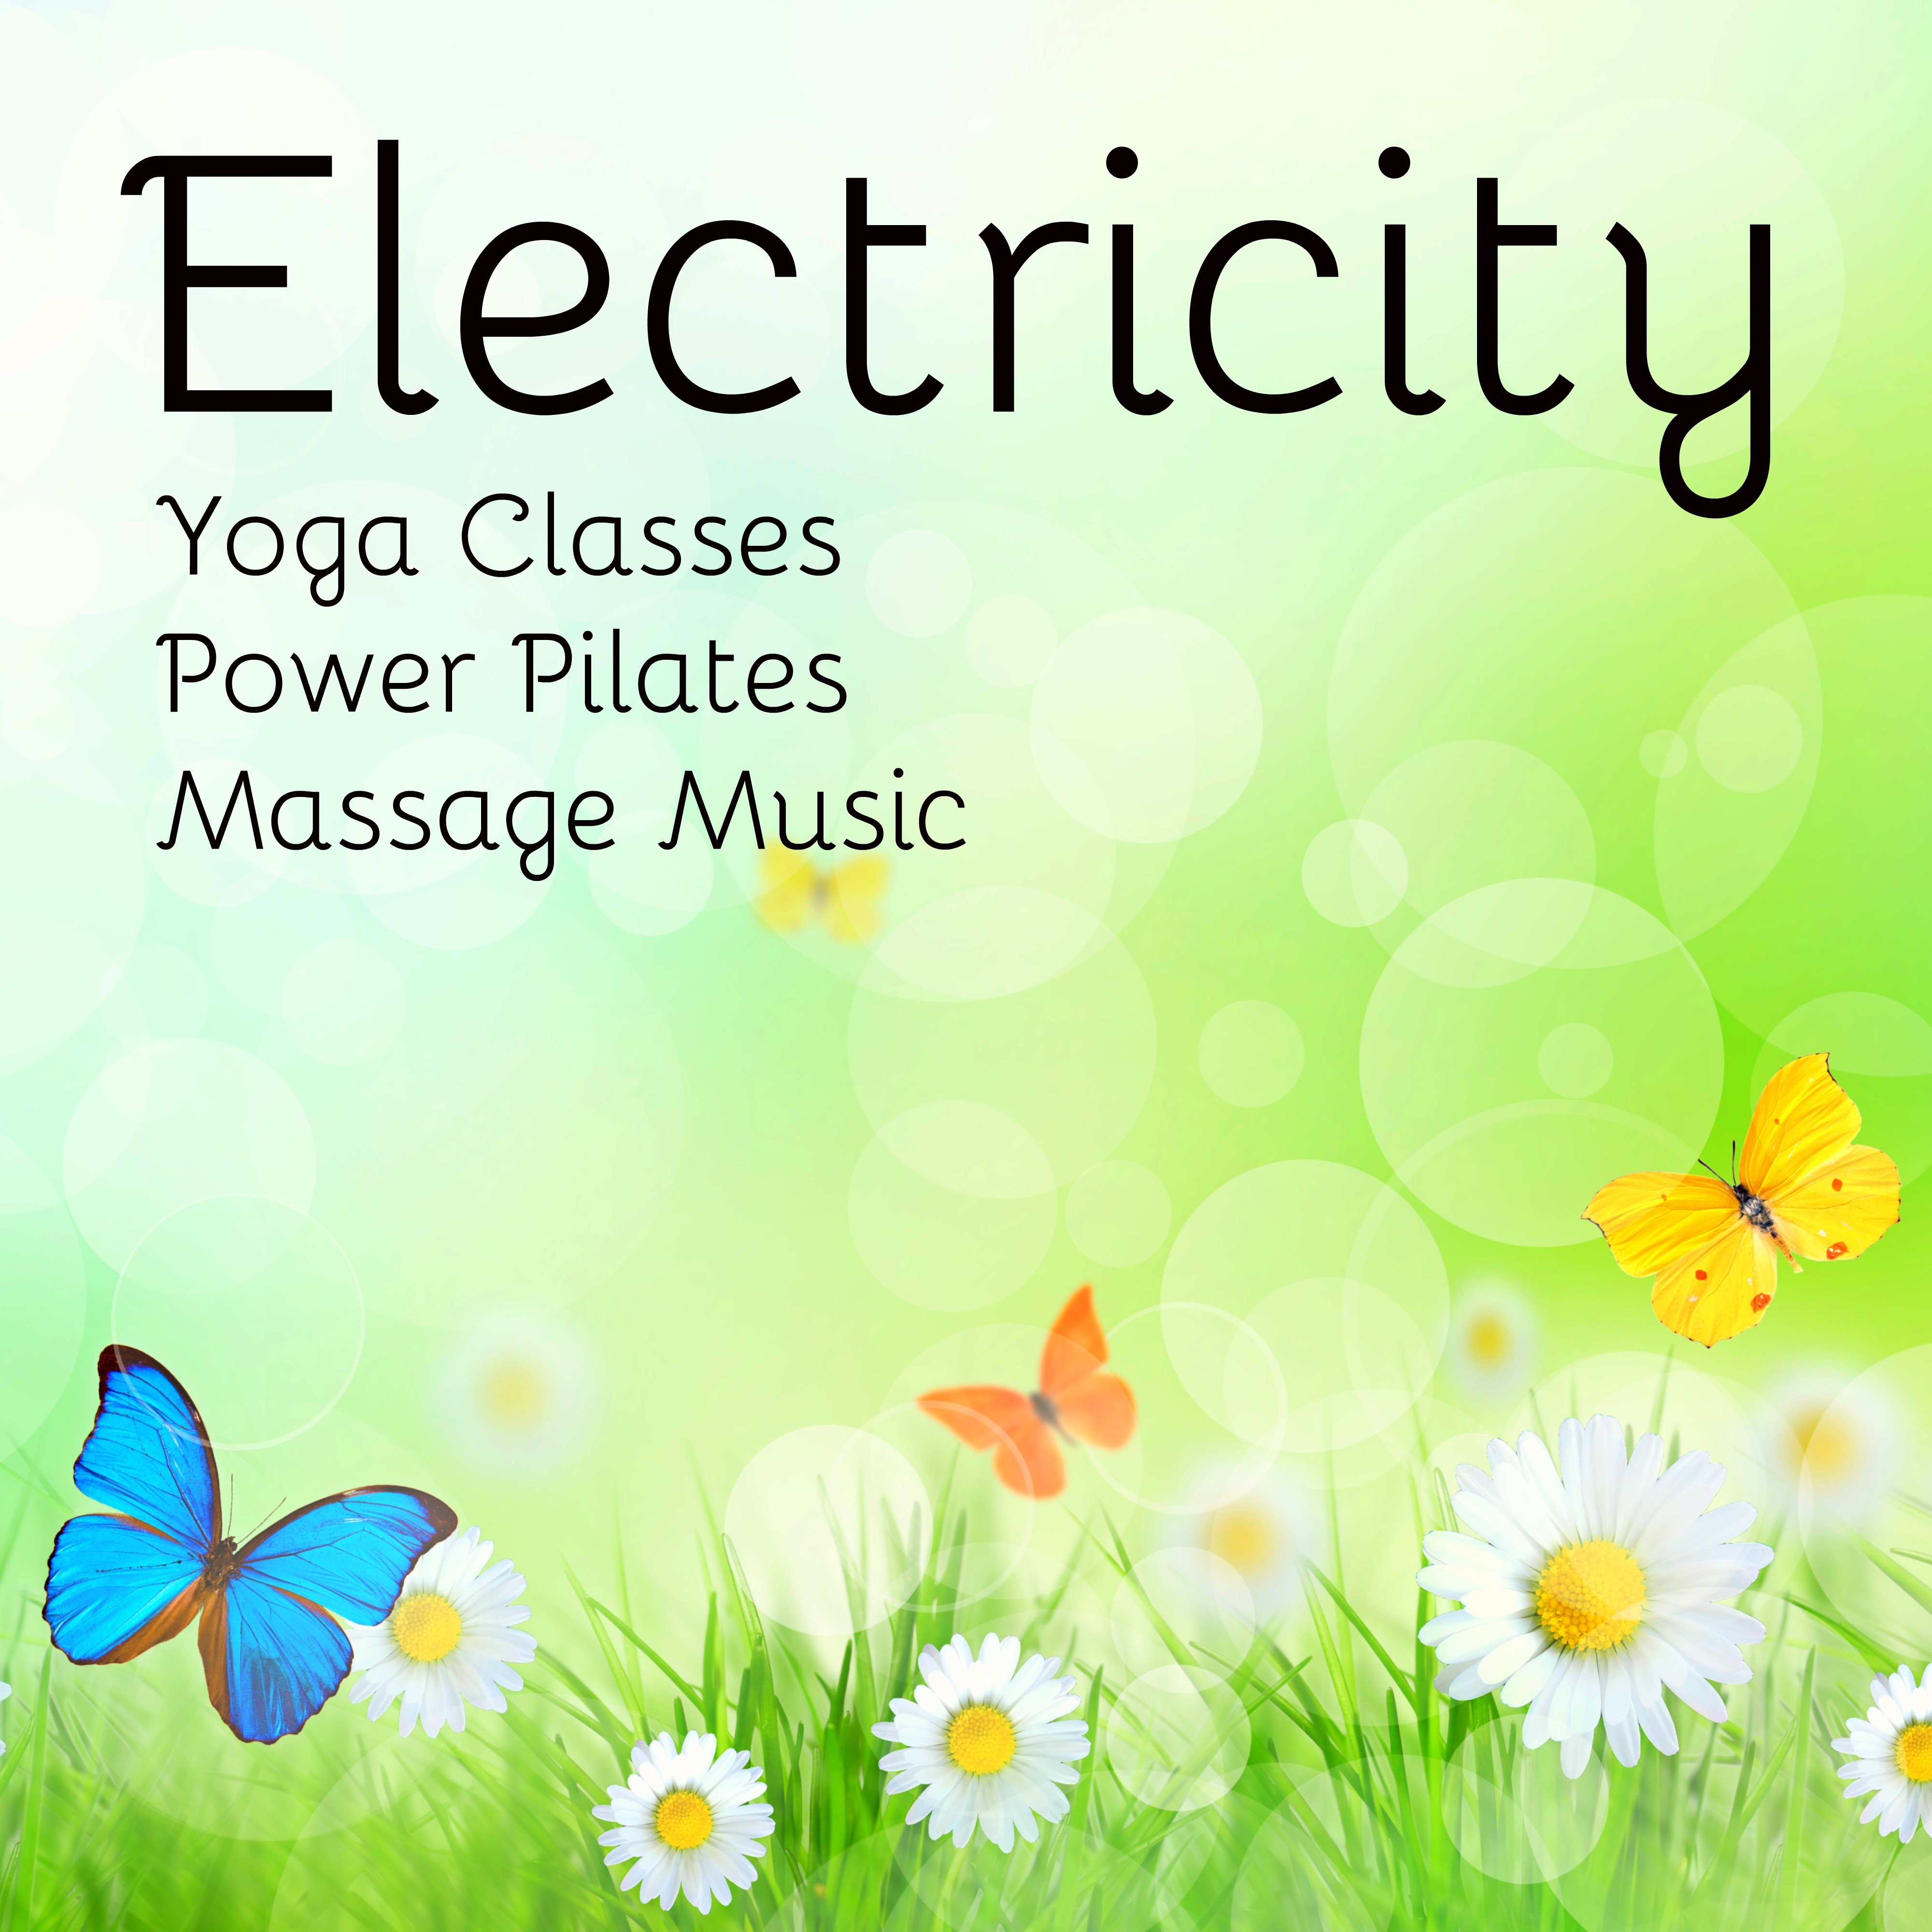 Electricity - Yoga Classes Power Pilates Massage Music with Relaxing Lounge Chillout Sounds